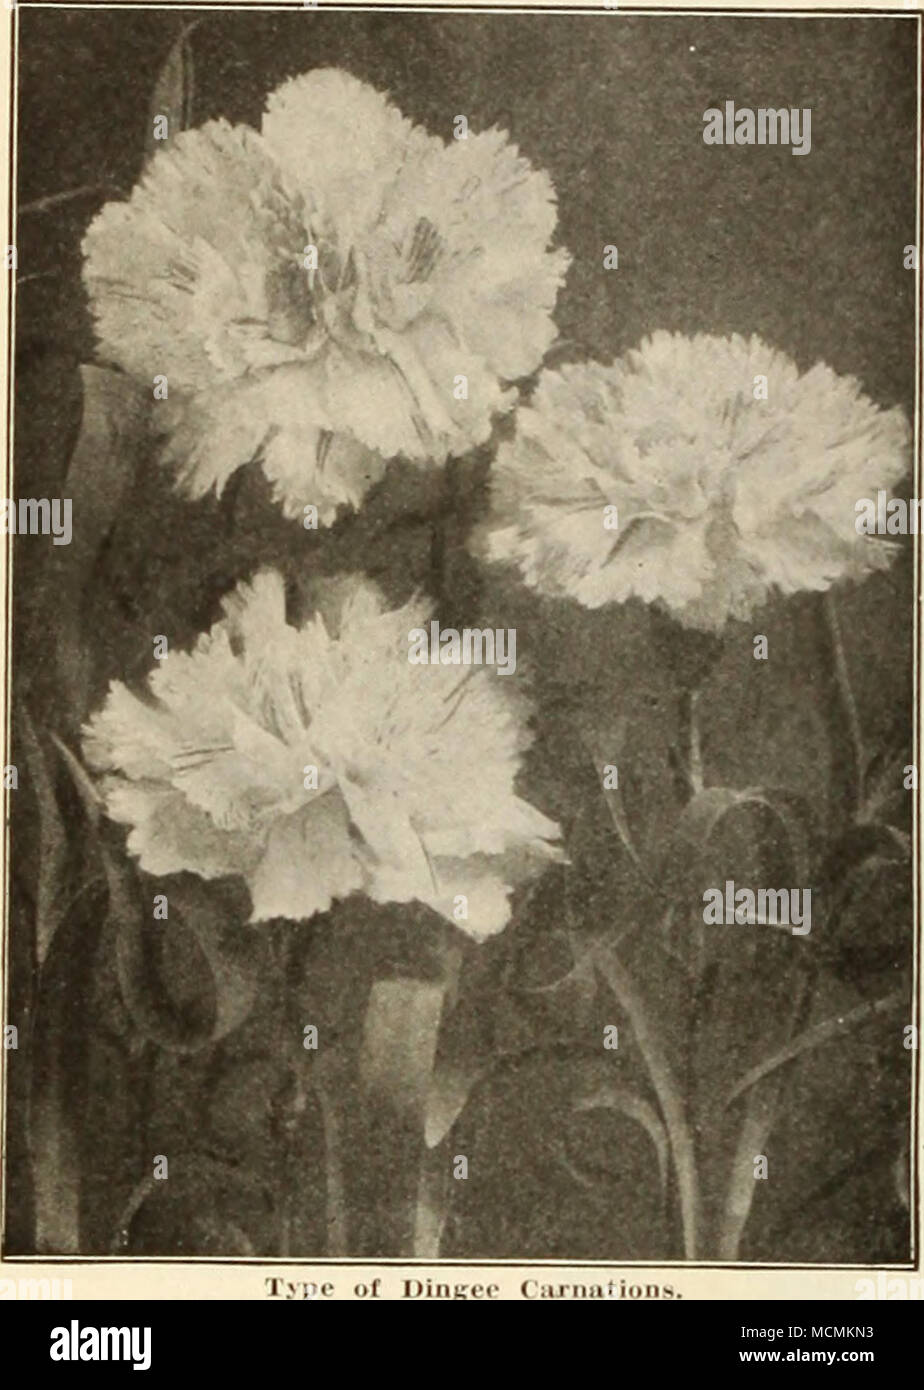 . Dingee Magnificent Carnations I i- ..n.r strontr plant.s an.l. wli.tllPr iilMiitfcl in Uio ..(.pii .rrcmnil oS In pots. Ihey quickly make laige specimens. IMoomiiit; profusely diirinK I he summer. Kor winter blooming pinch the plants hack from time in time durlnp: the summer. Brine indoors In early tall. Grown in pots they will bloom abundantly during the winter. New Varieties .Vlnia WardâNew white variegated: large and fragrant. Dorothy 4iordonâA tine, clear, deep shell pink. &lt;il&lt;Â»riosaâPure deep pink. IlarlowardenâThe best standard crimson on the market. Mrs. c. W. WardâDeep pink. Stock Photo